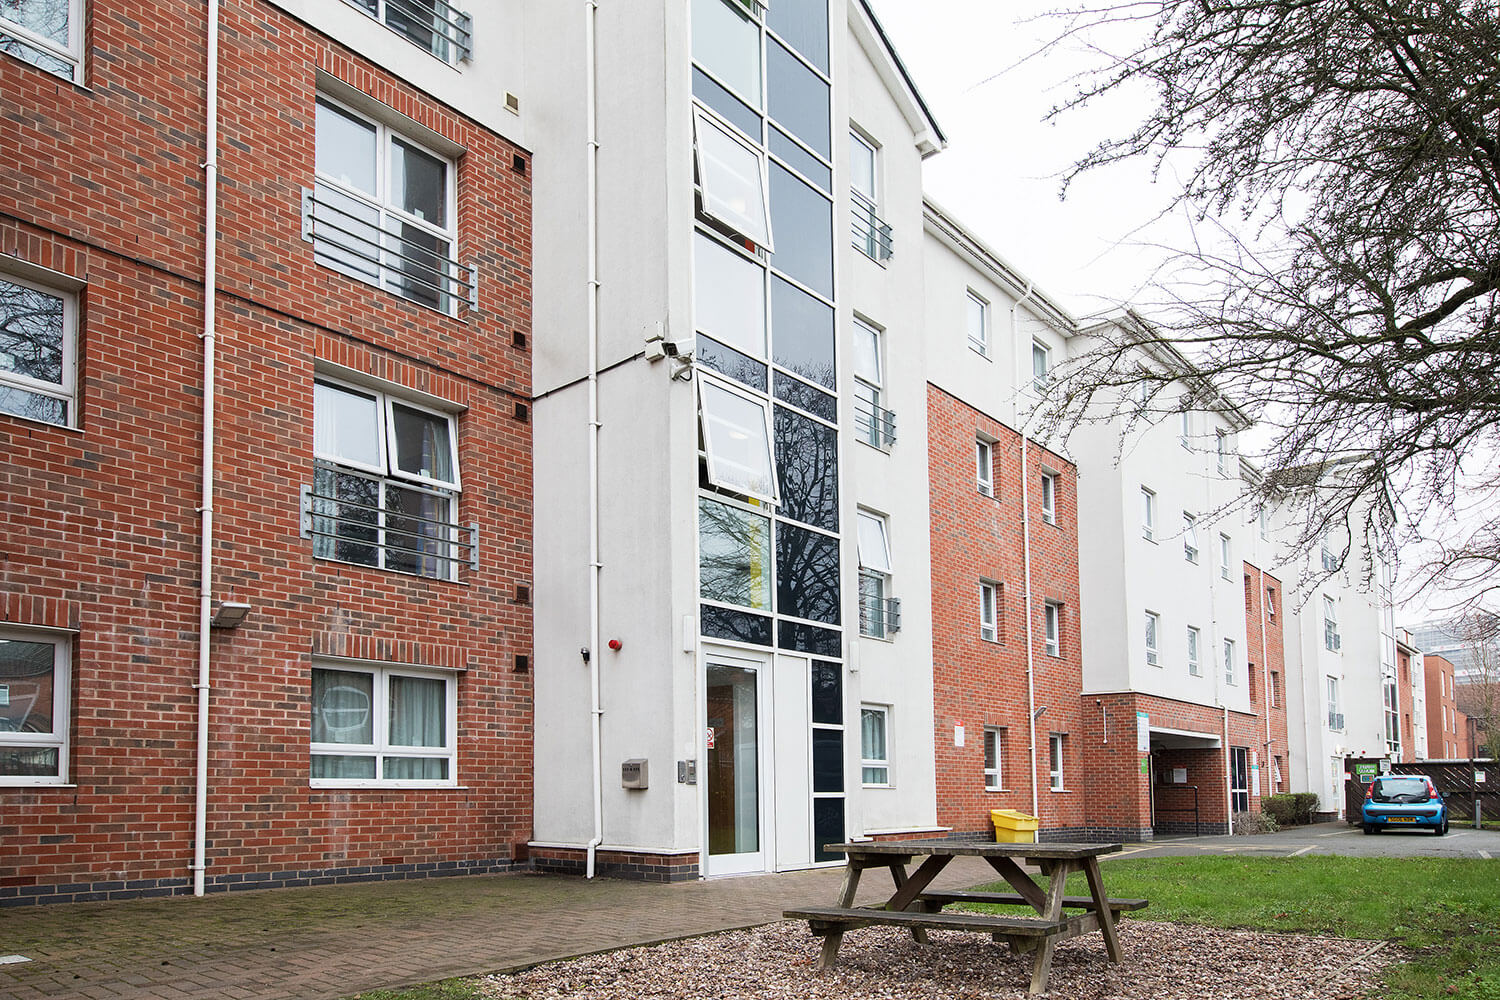 Courtyard garden at Raglan House student accommodation in Coventry